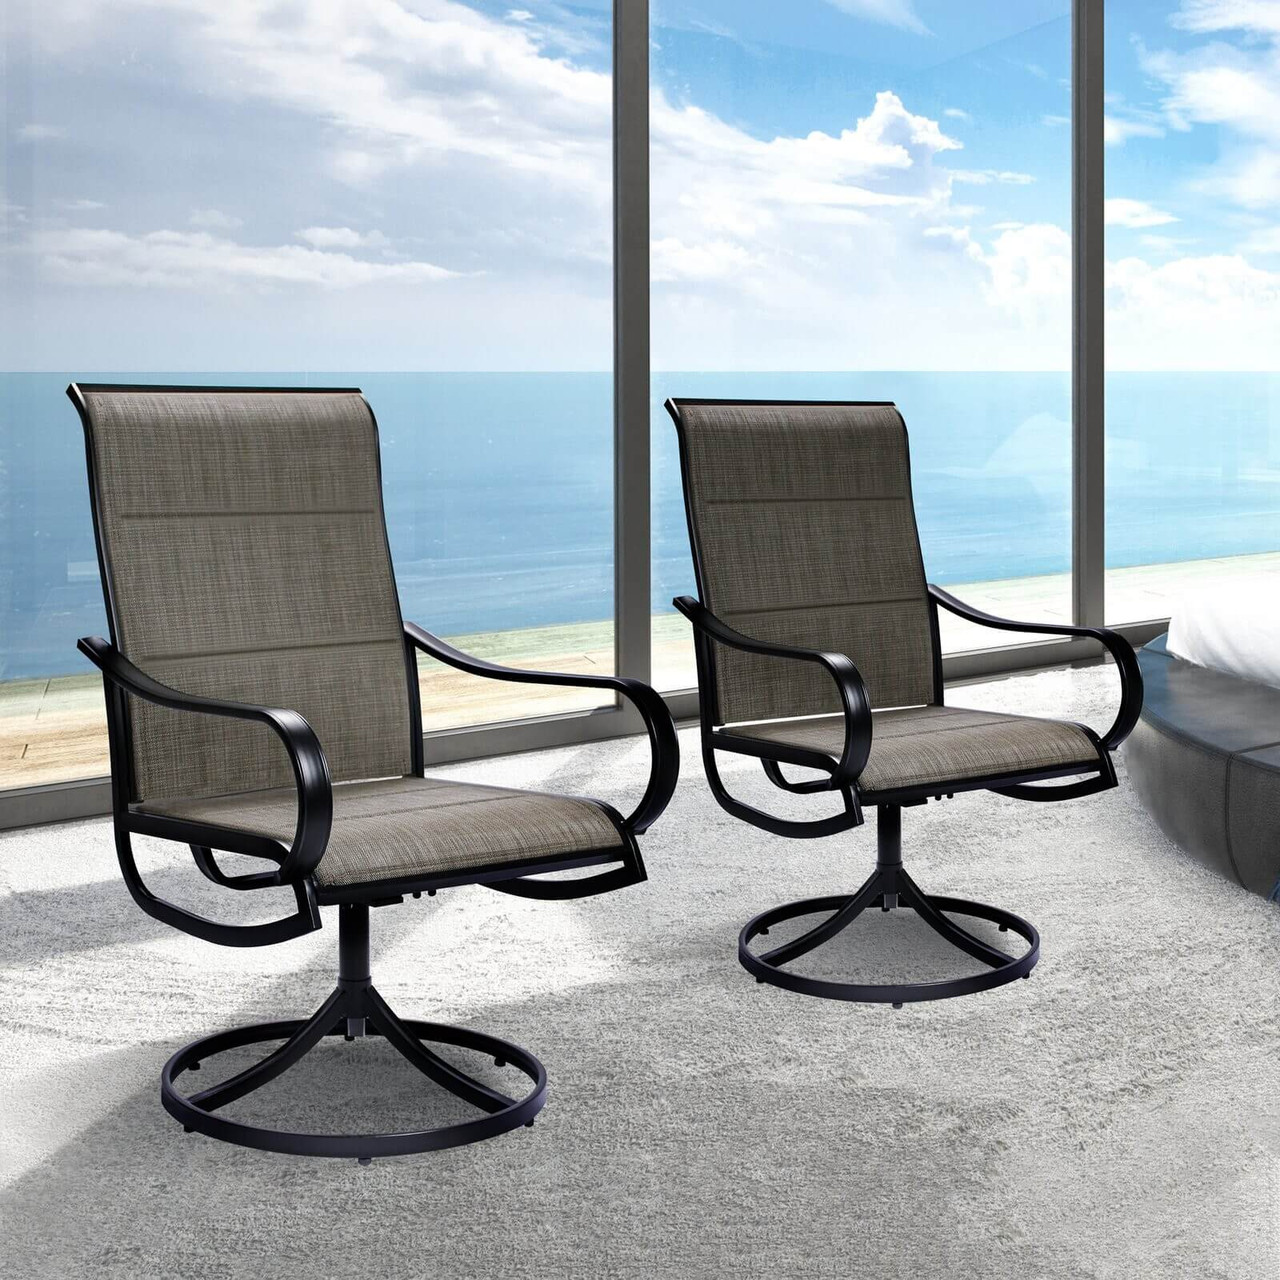 Set of 2 Gray Padded Swivel Outdoor Dining Chairs